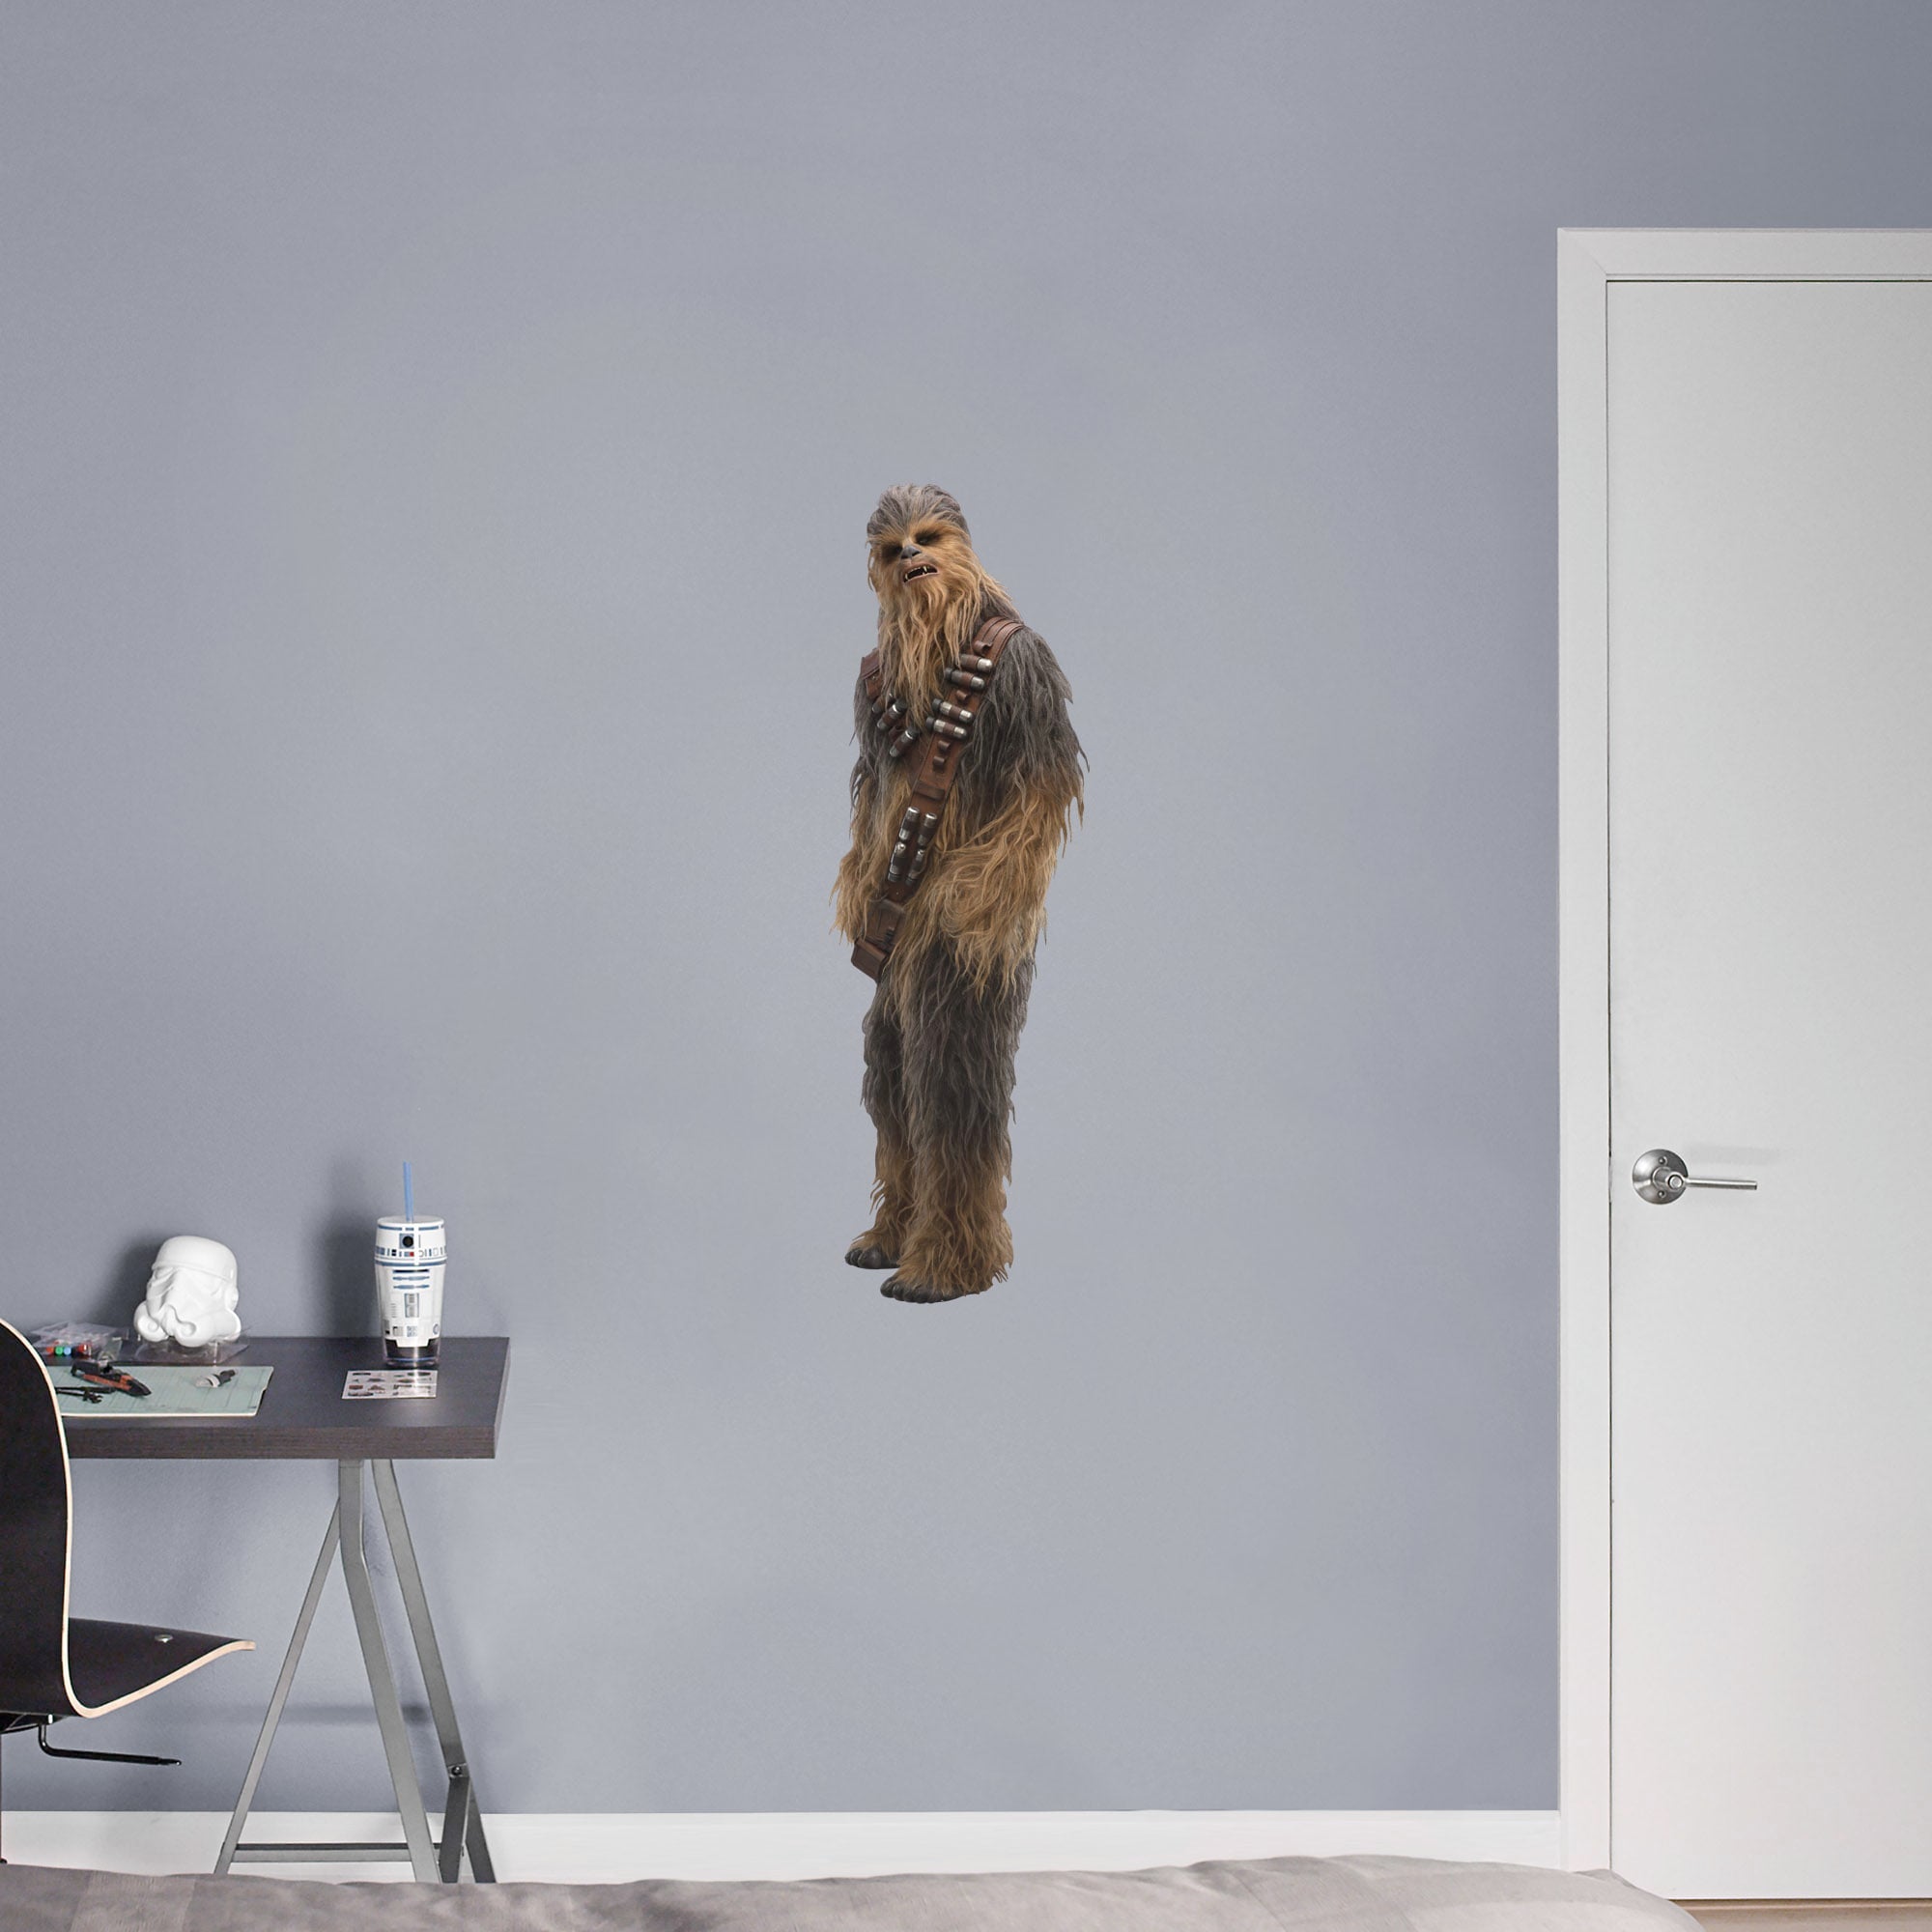 Chewbacca - Solo: A Star Wars Story - Officially Licensed Removable Wall Decal XL by Fathead | Vinyl